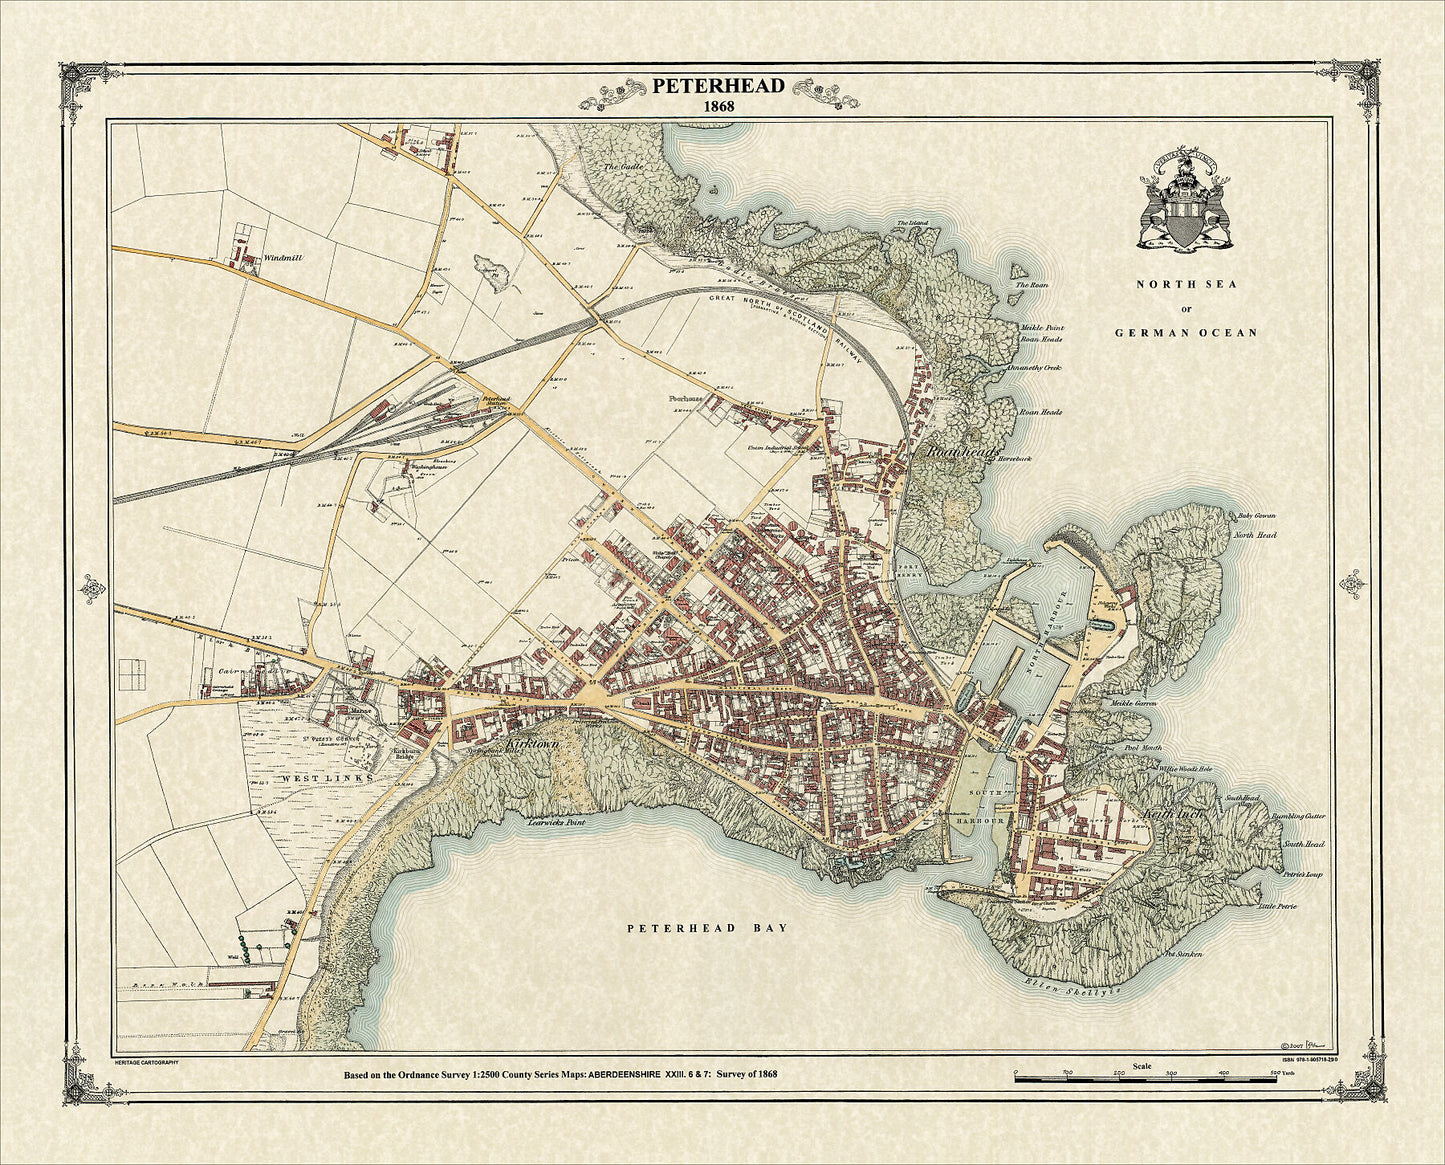 Coloured Victorian map of Peterhead in 1868 by Peter J Adams of Heritage Cartography